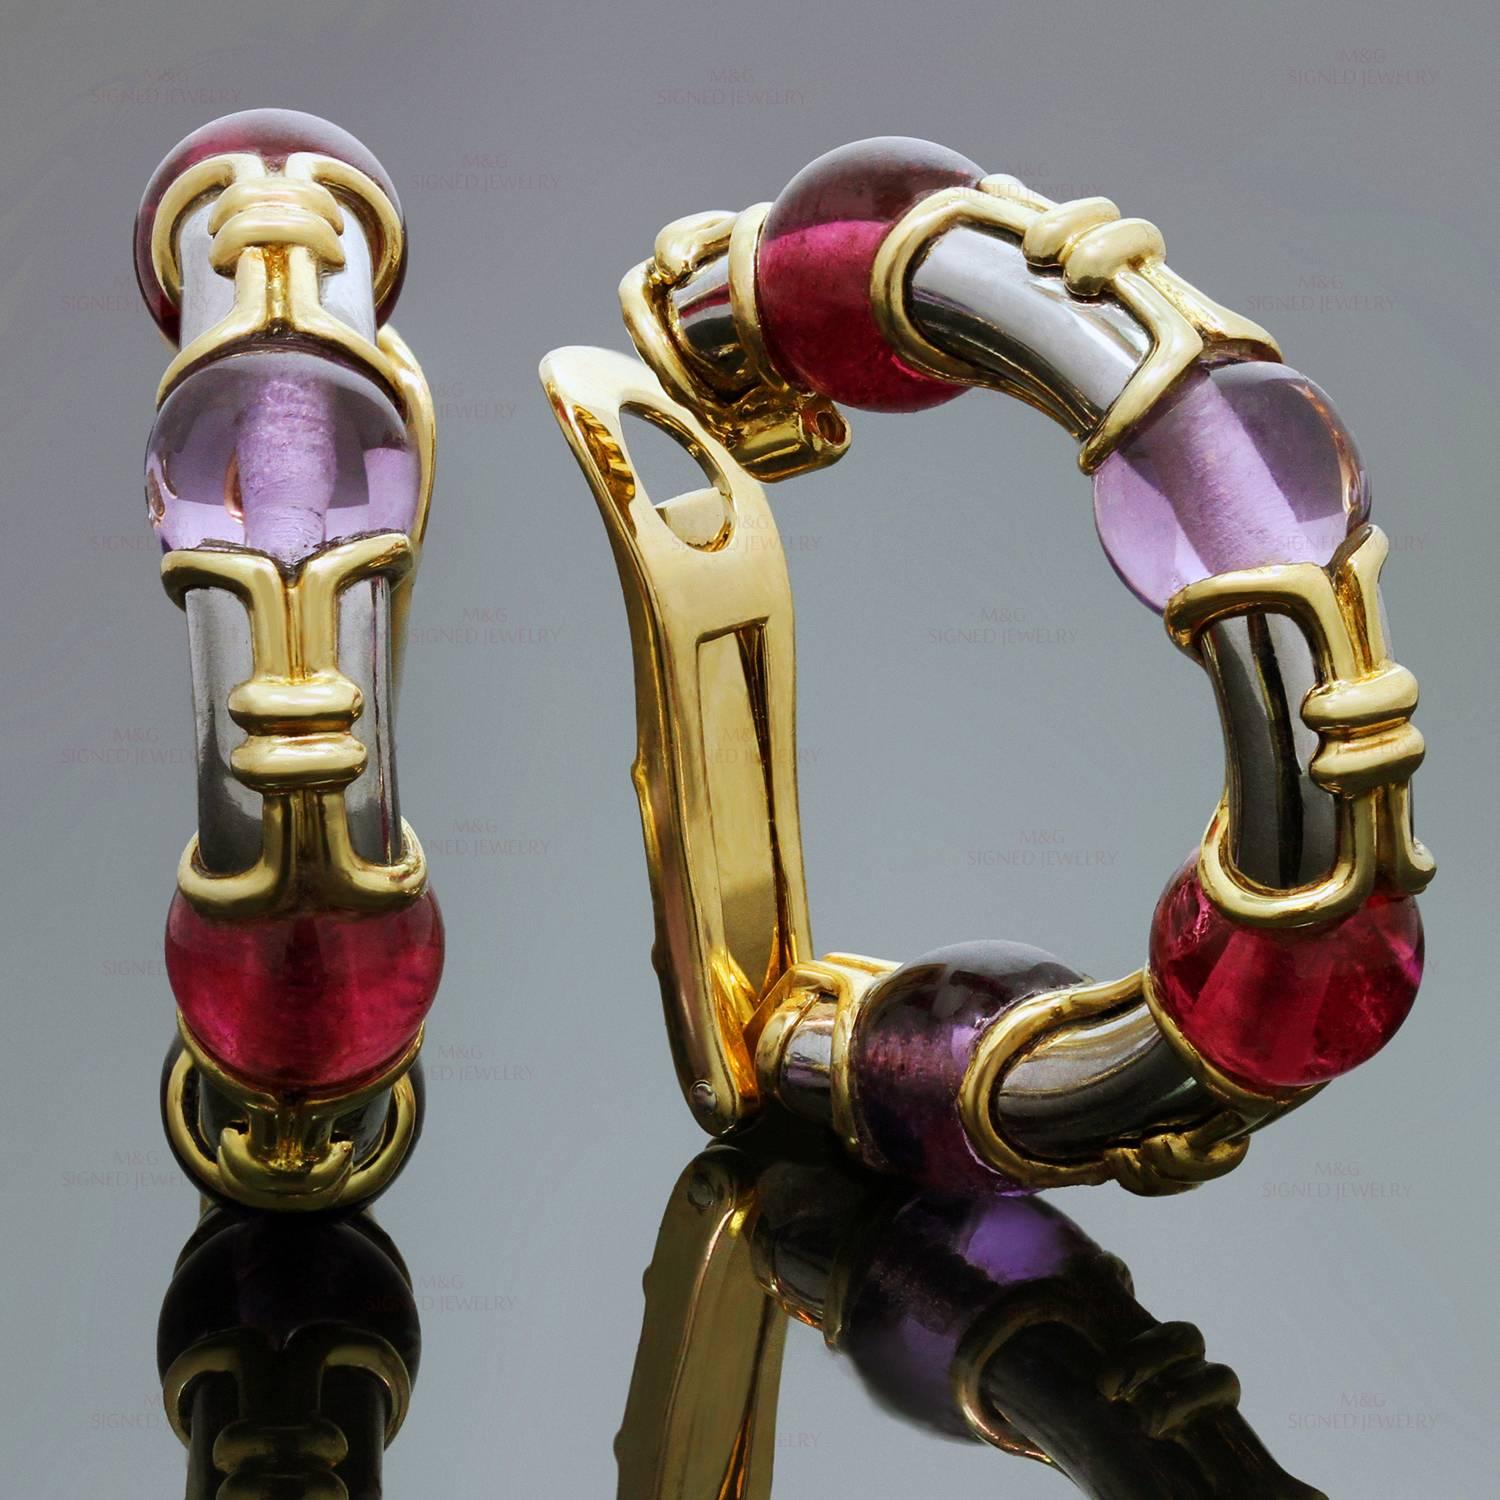 These stunning Bulgari clip-on hoop earrings are crafted in 18k yellow gold with 18k white gold accents and set with cabochon purple amethyst and pink tourmaline stones. Made in Italy circa 1989. Measurements: 0.31